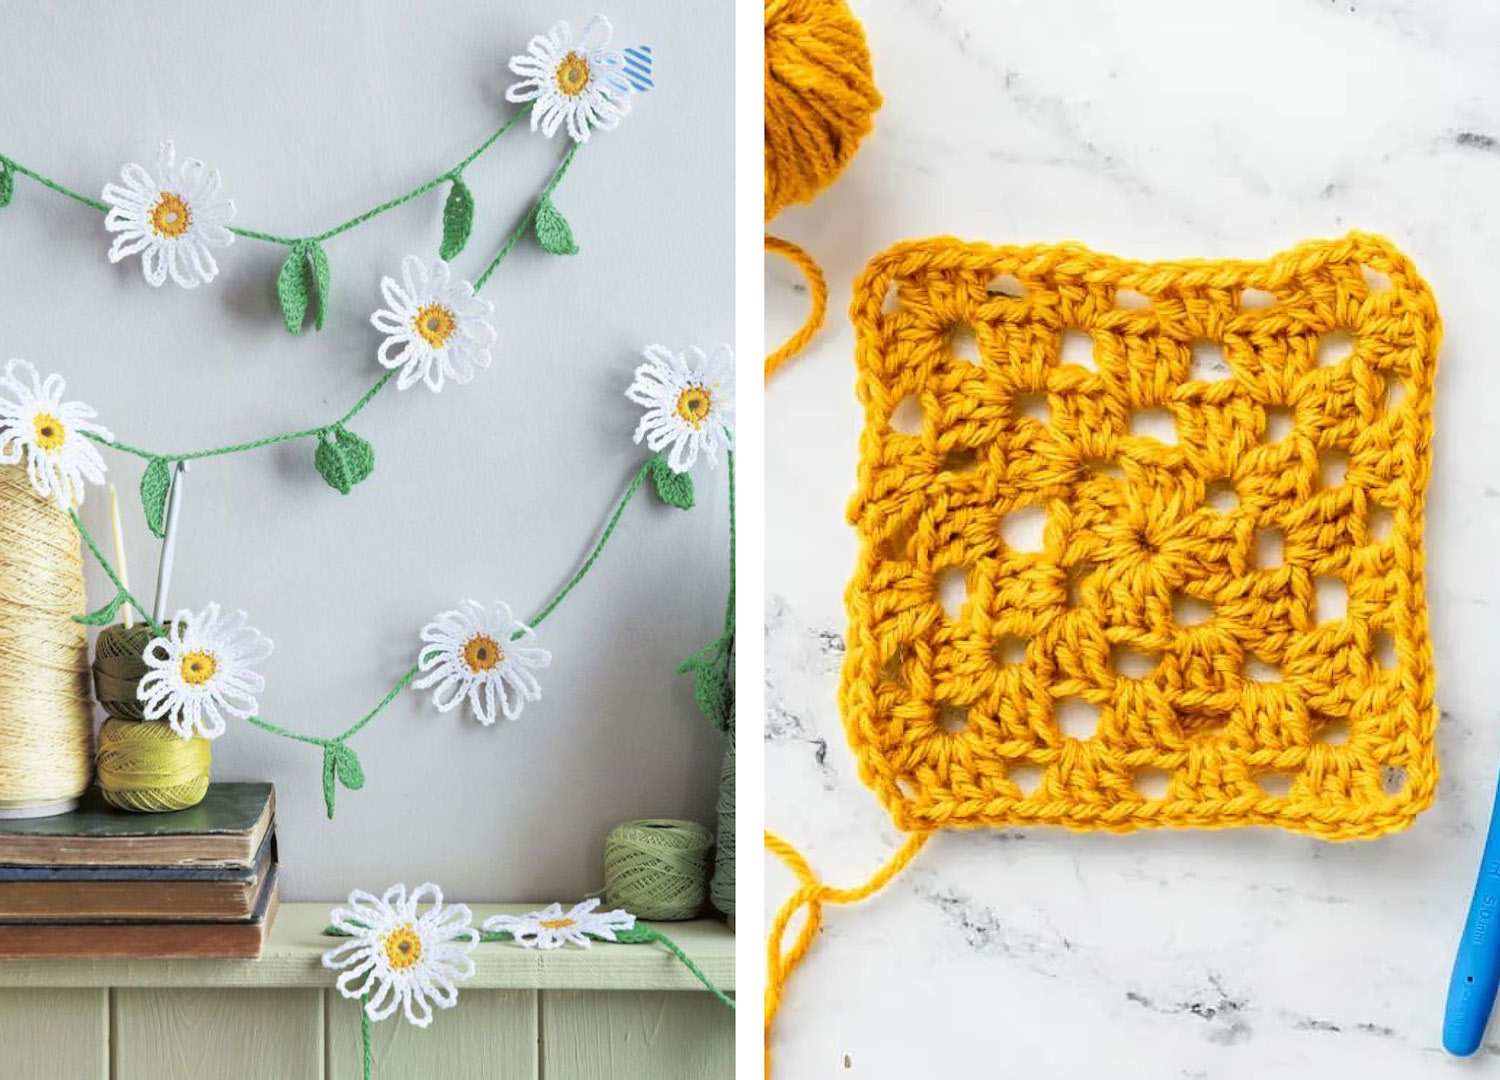 Crochet Your Way: A Beginner's Guide to Get Hooked - peppermint